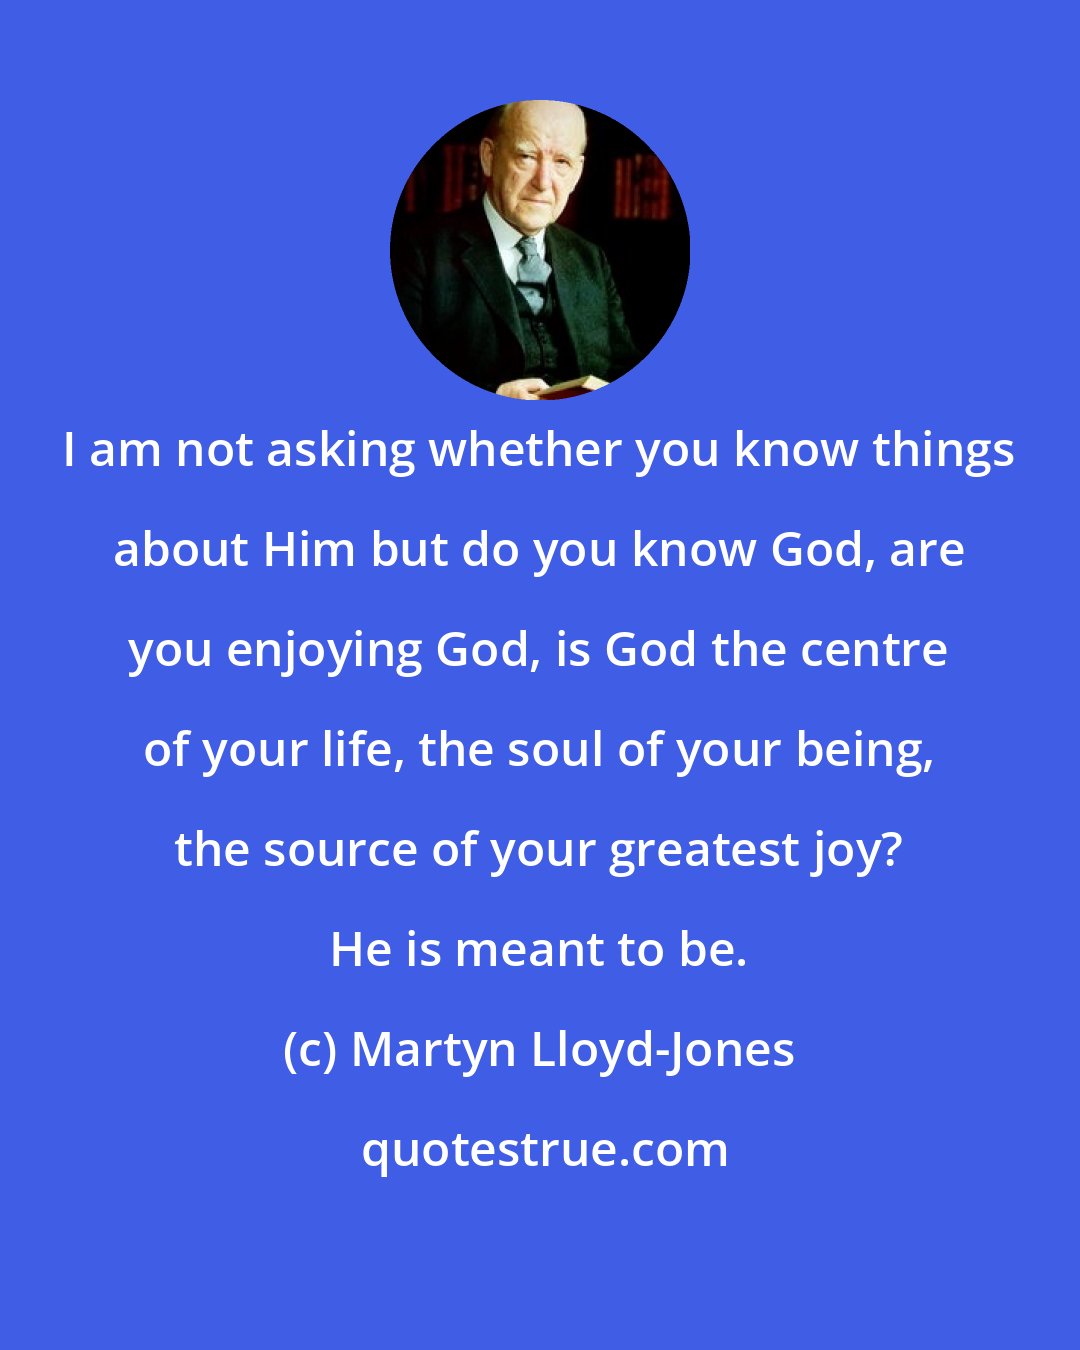 Martyn Lloyd-Jones: I am not asking whether you know things about Him but do you know God, are you enjoying God, is God the centre of your life, the soul of your being, the source of your greatest joy? He is meant to be.